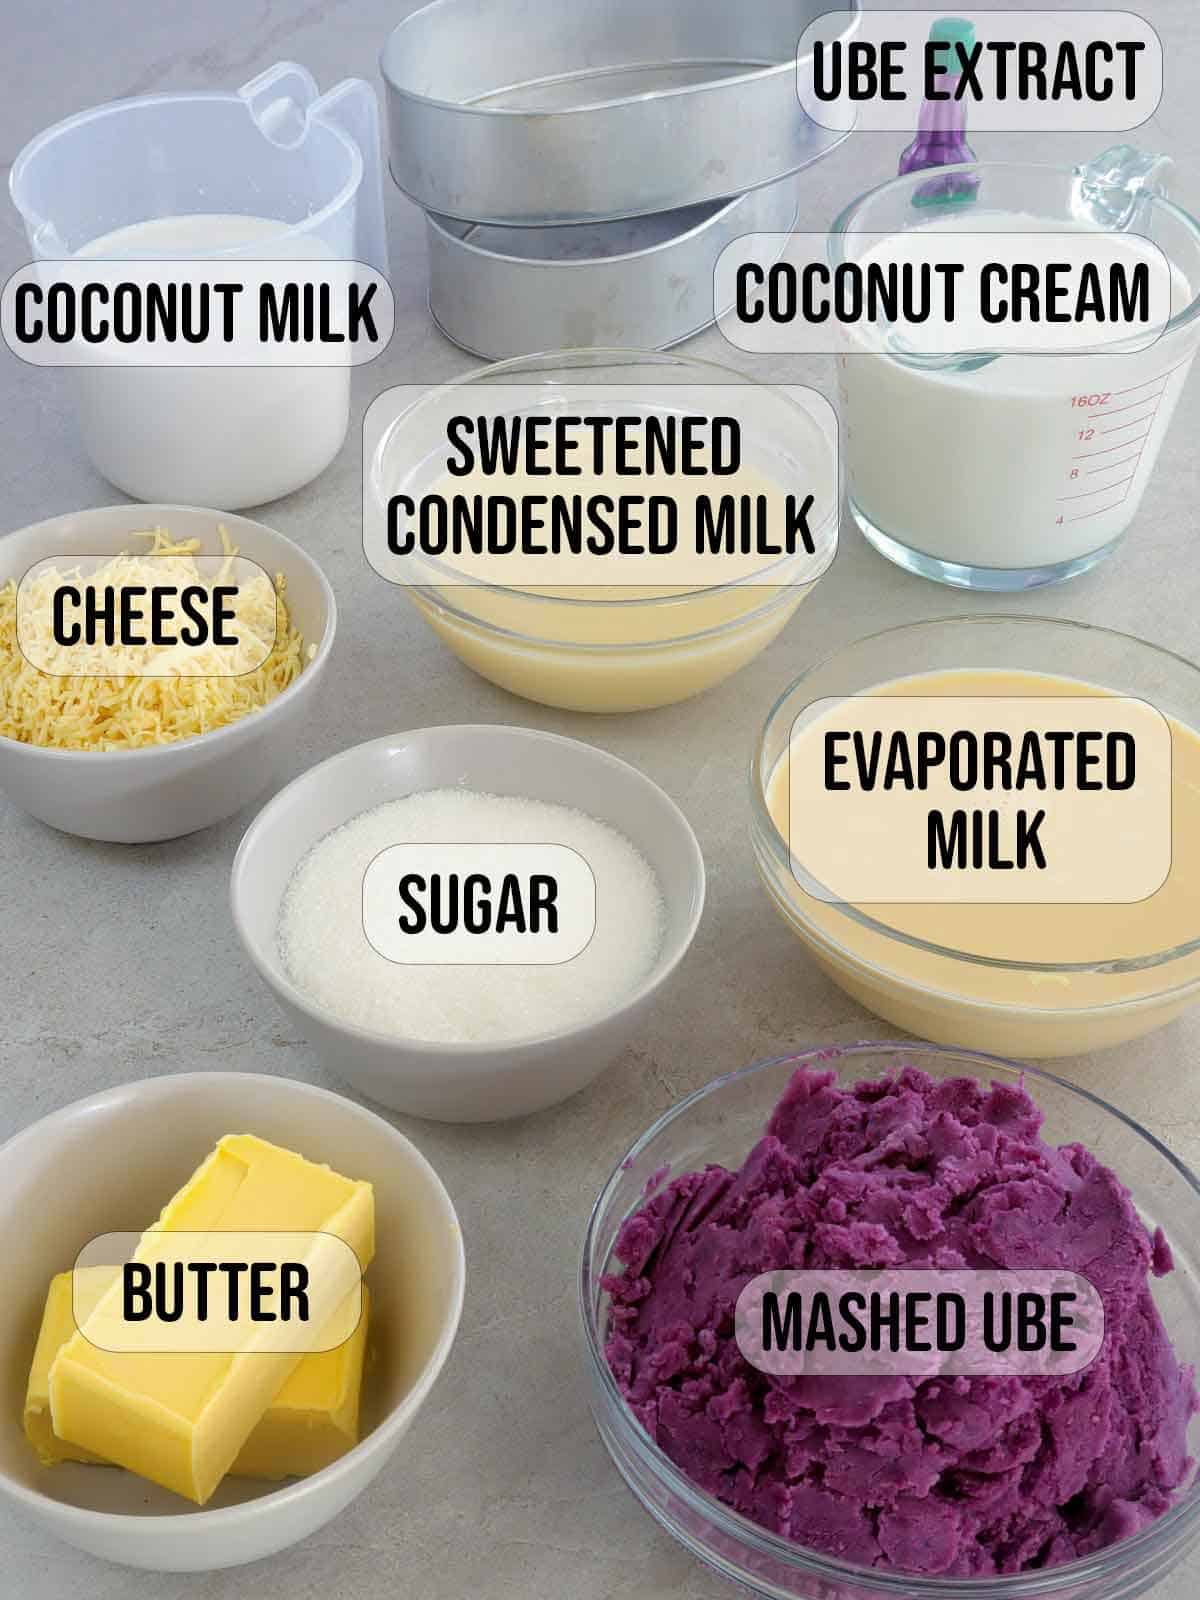 mashed ube, condensed milk, evaporated milk, butter, sugar, cheese, coconut milk in bowls.